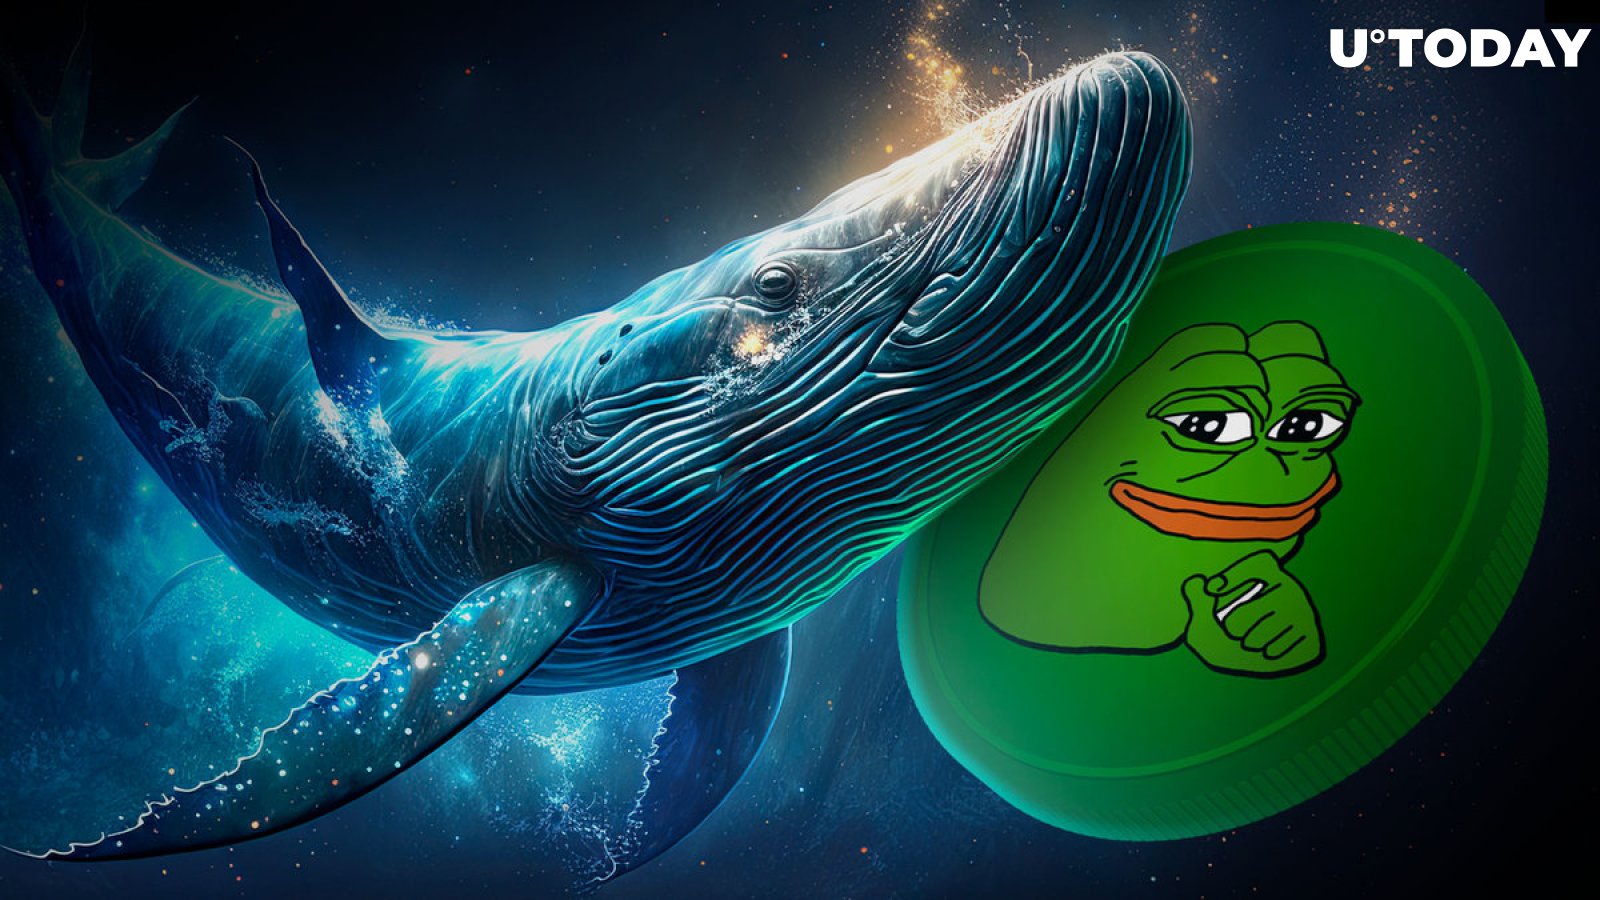 Pepe (PEPE) Price Surges by 60% as Whales Are Surprisingly Buying Meme Again